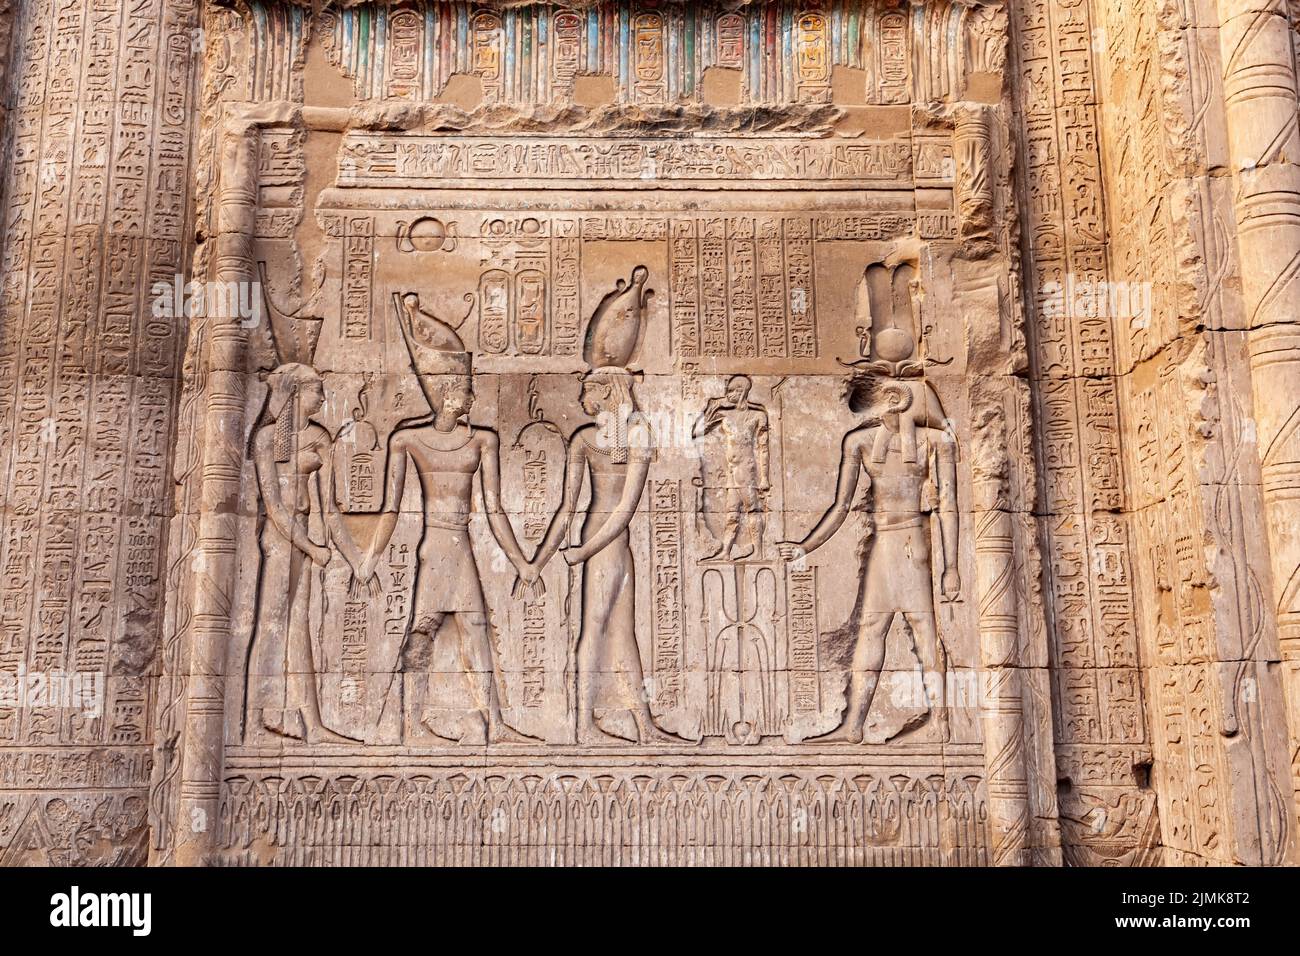 Wall relief at the Temple of Khnum (The Ram Headed Egyptian God) in Esna. Stock Photo